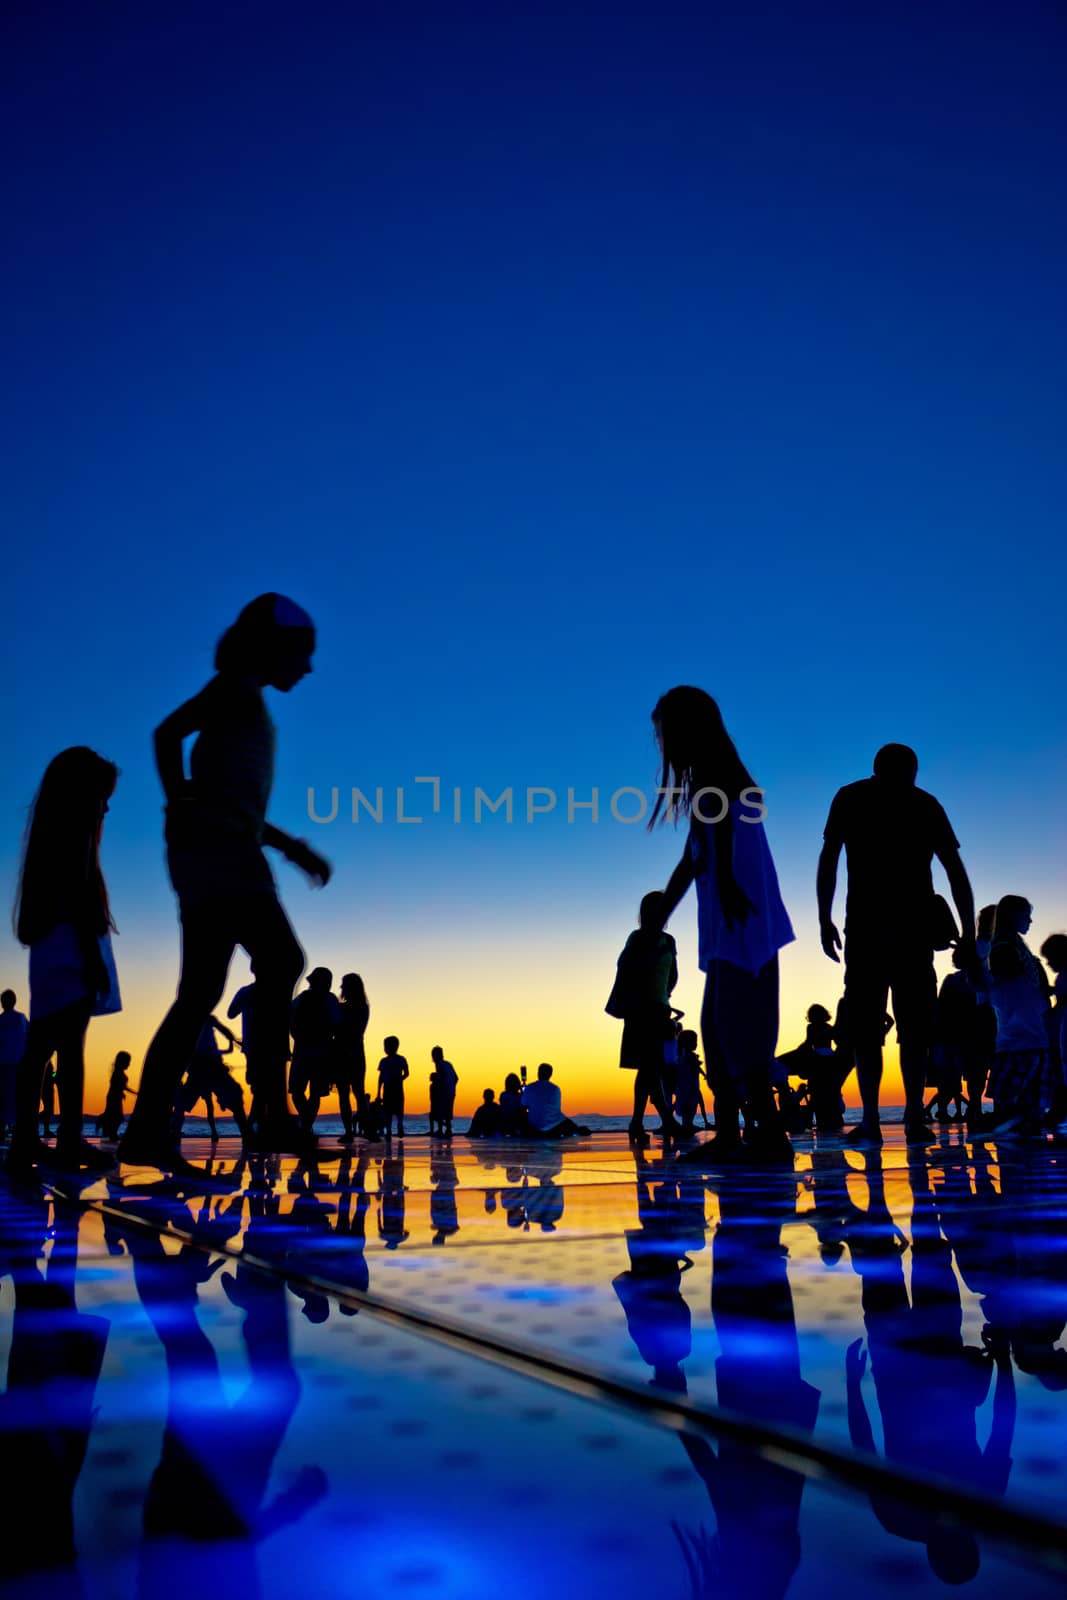 People silhouette on colorful sunset by xbrchx